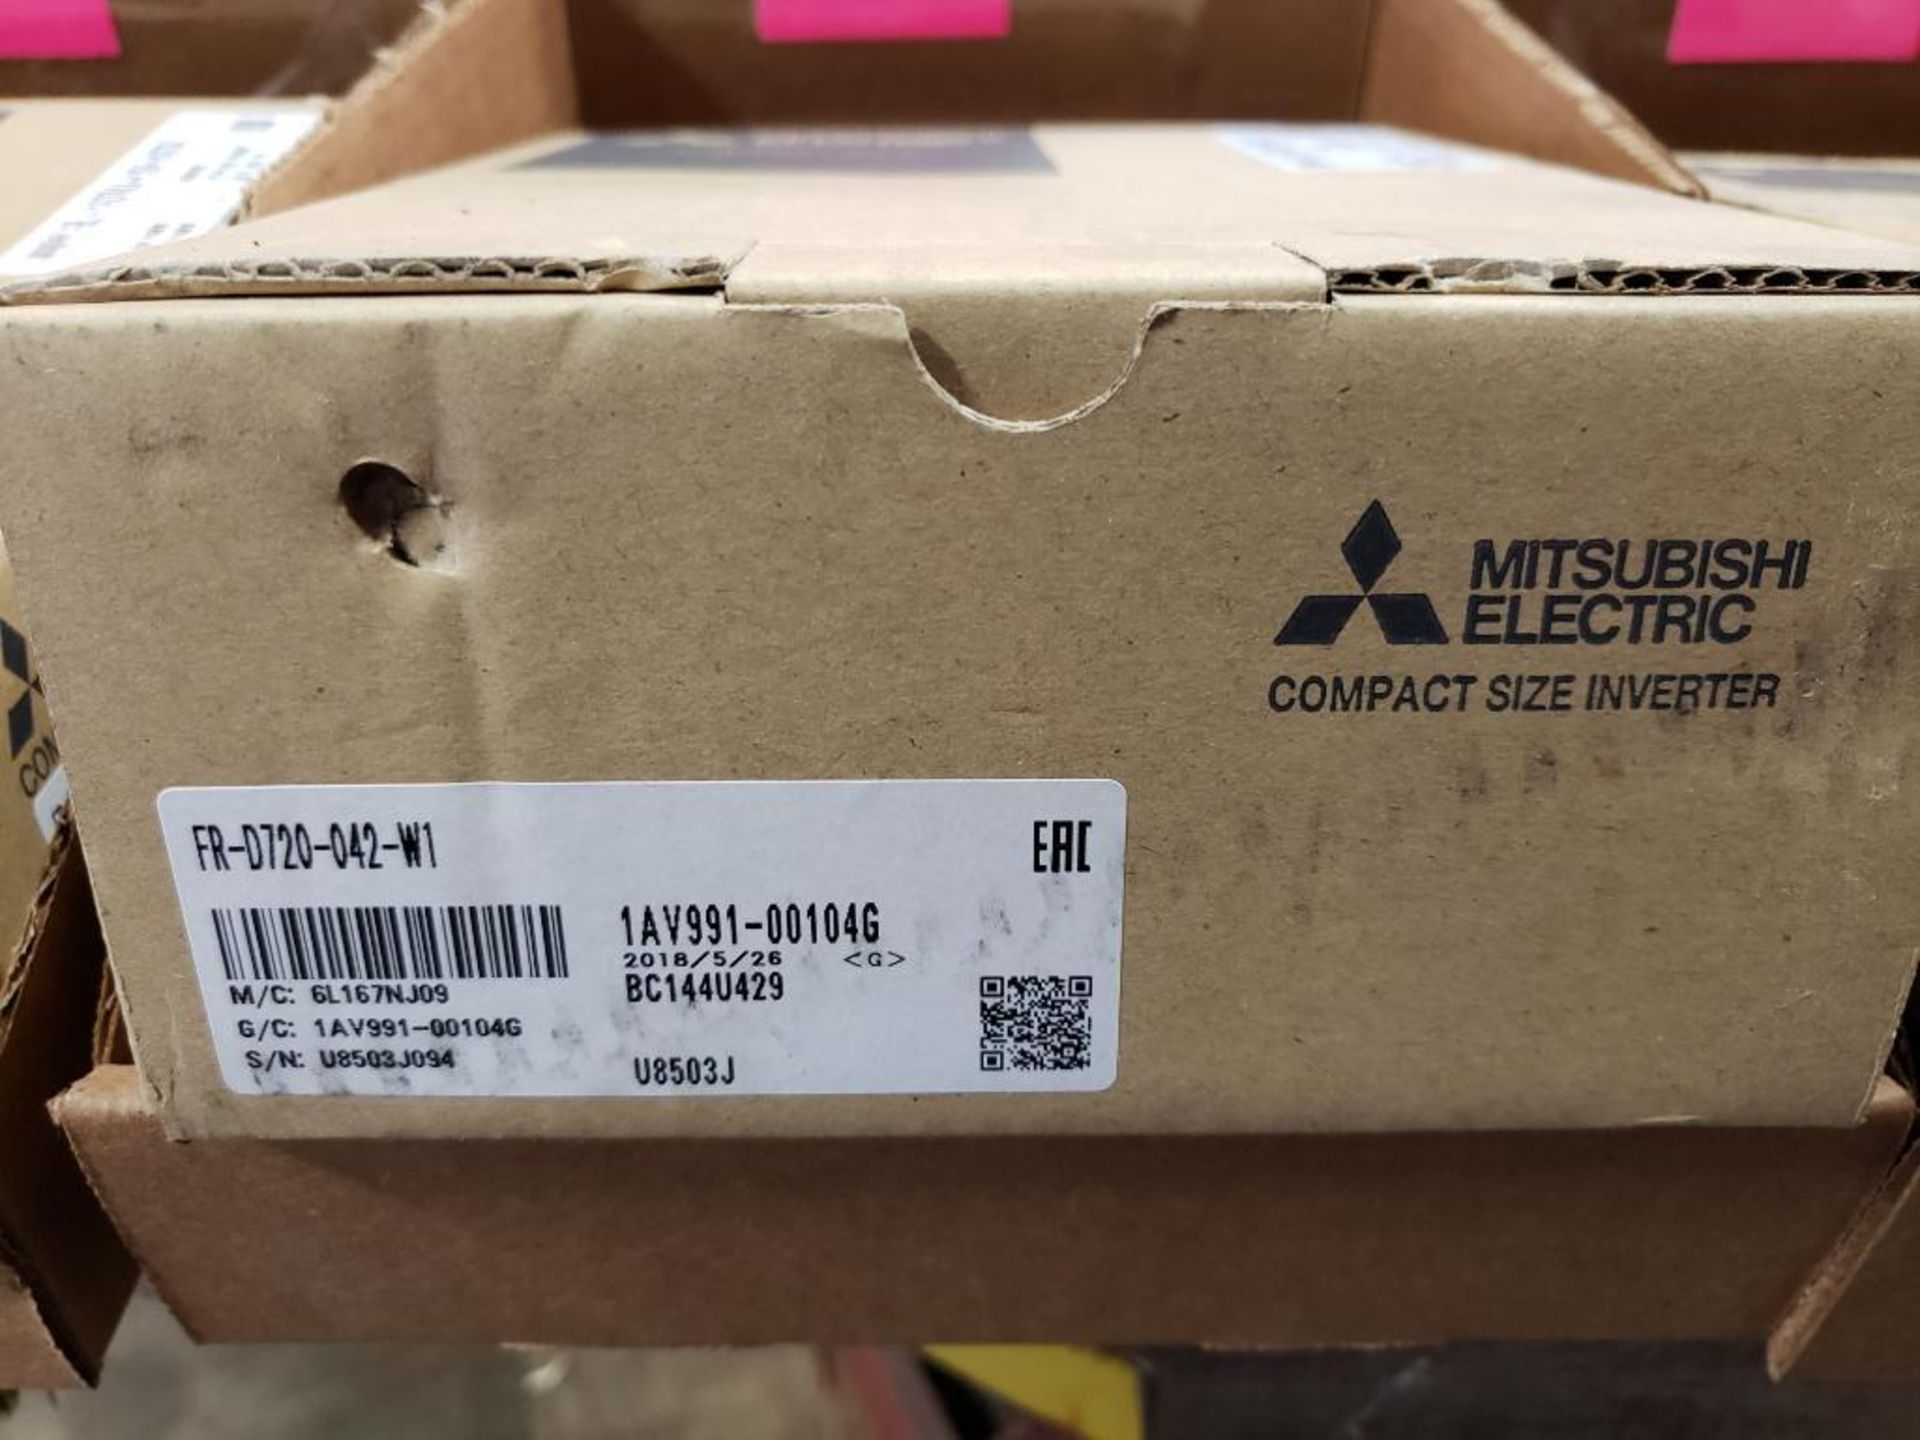 Mitsubishi Electric FR-D720-042-W1 compact size inverter. New in box. - Image 2 of 4